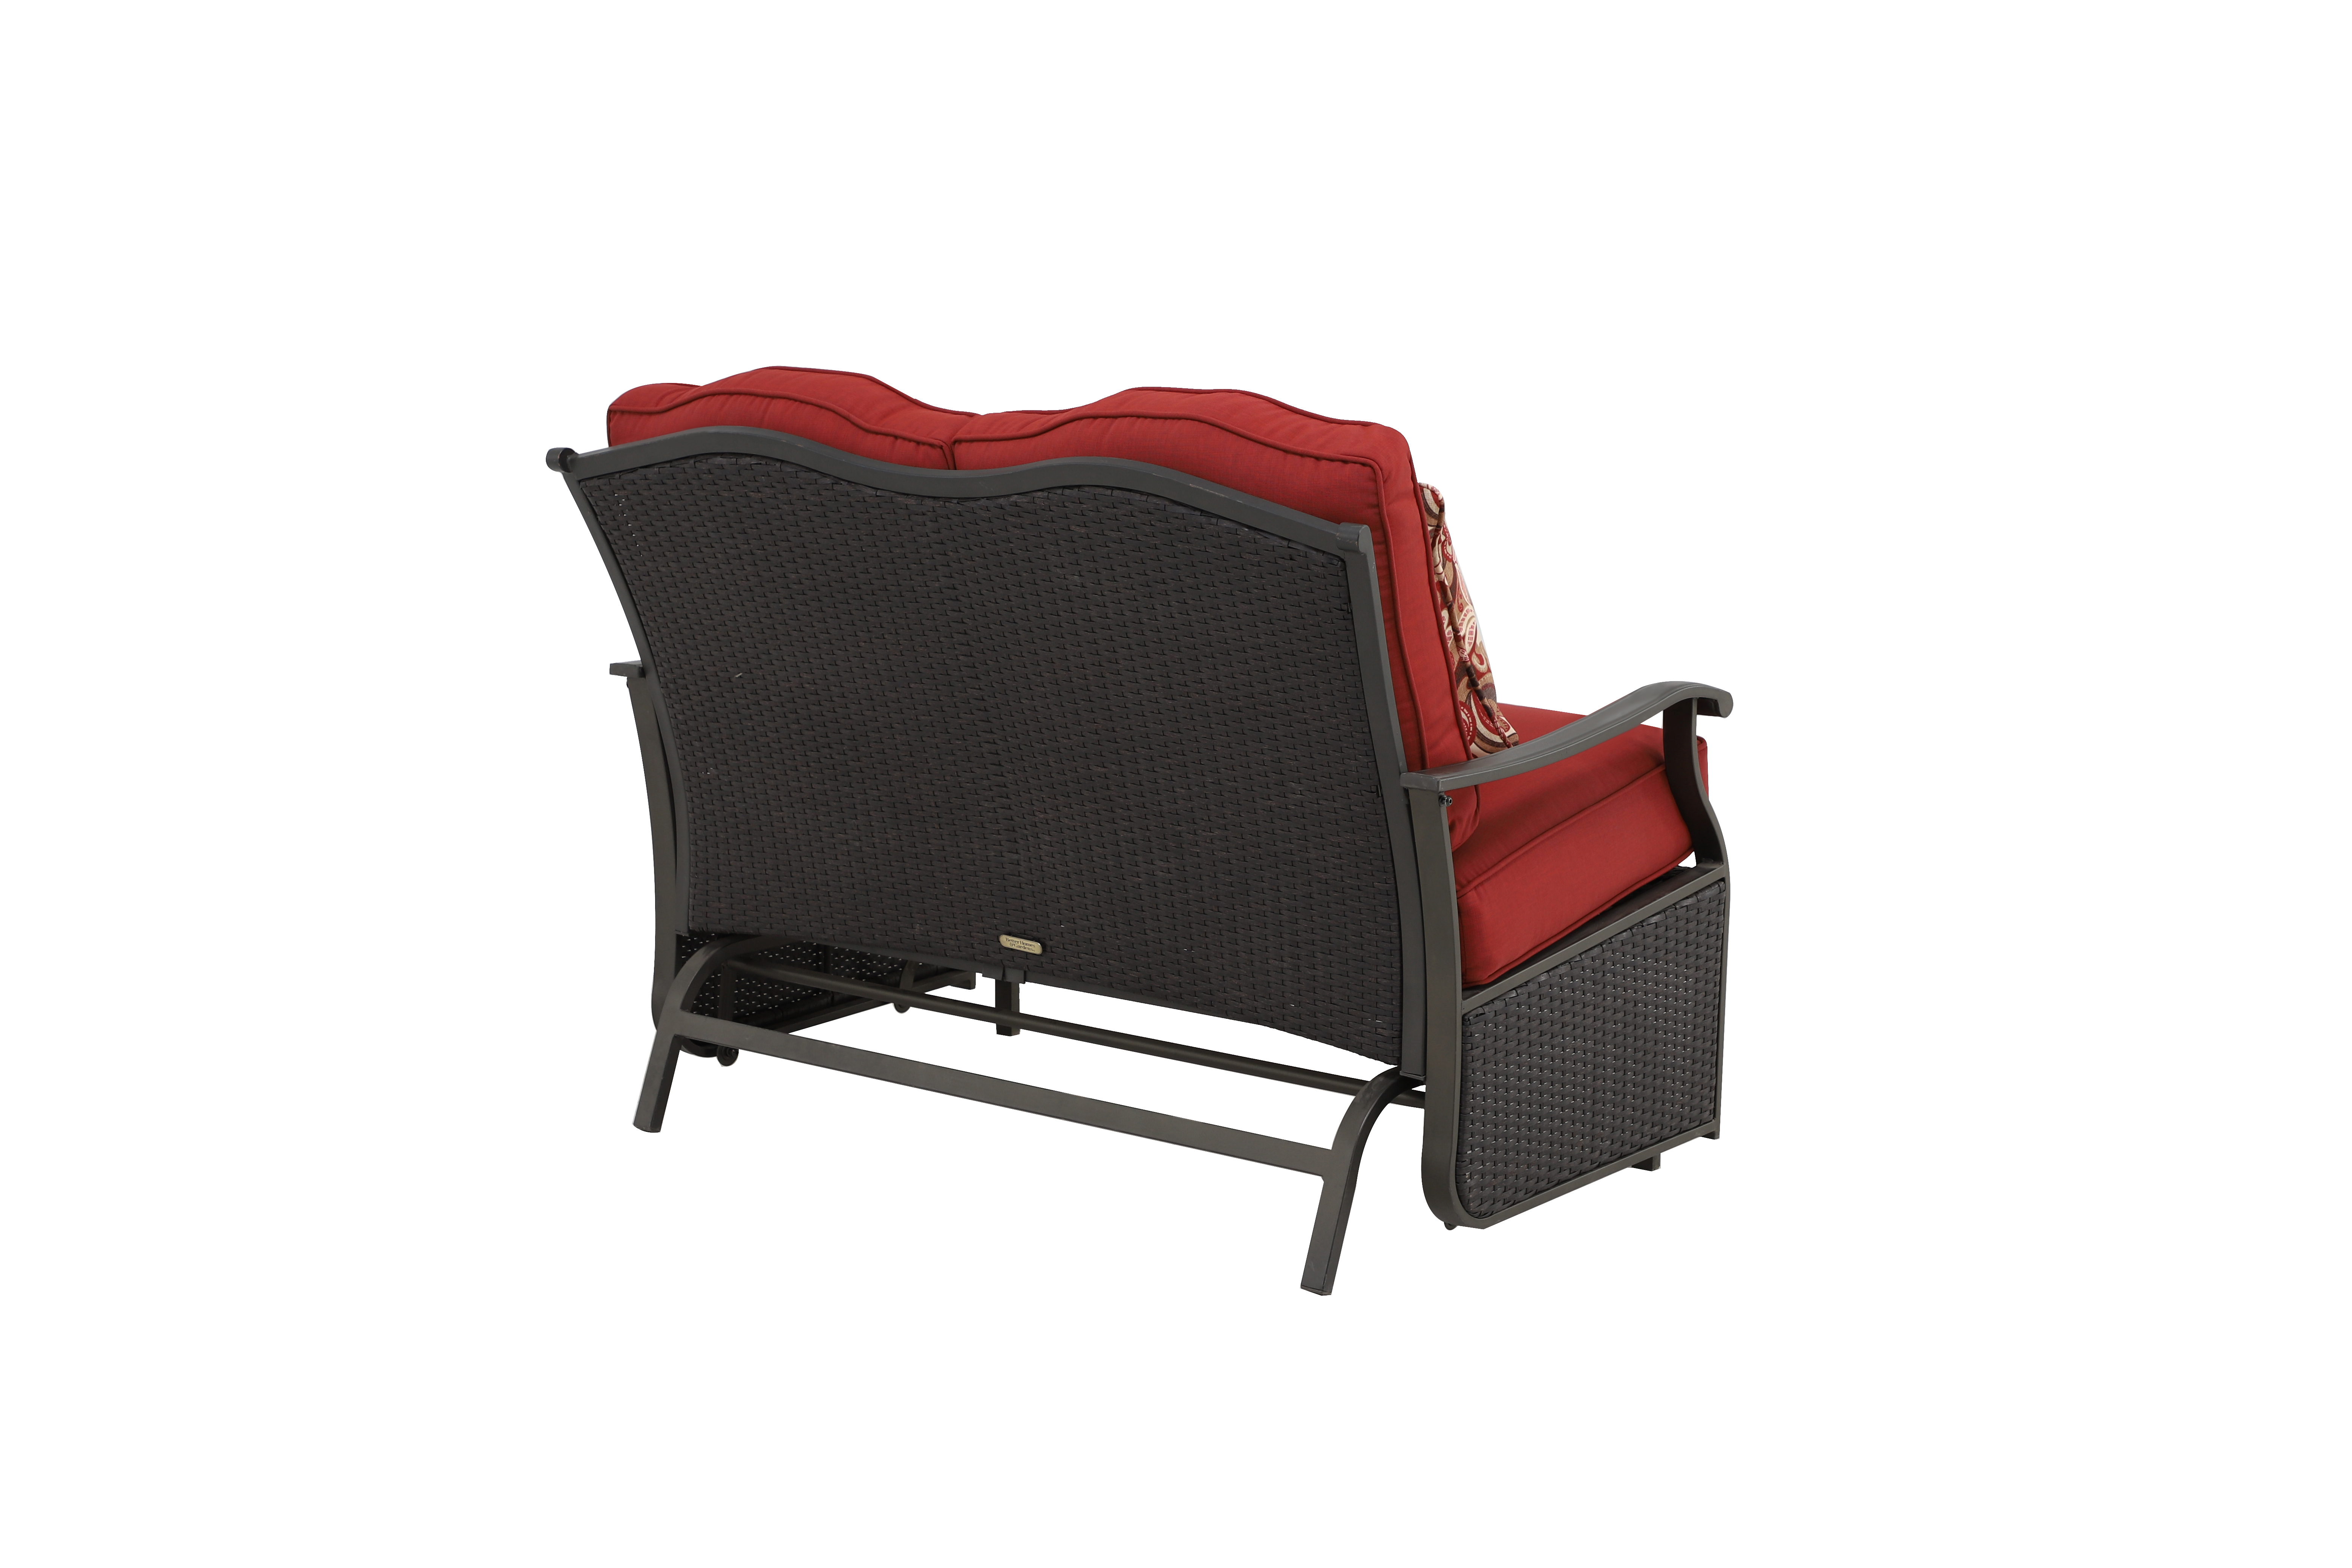 Better Homes & Gardens Providence Steel Outdoor Glider Loveseat - Red - image 3 of 6